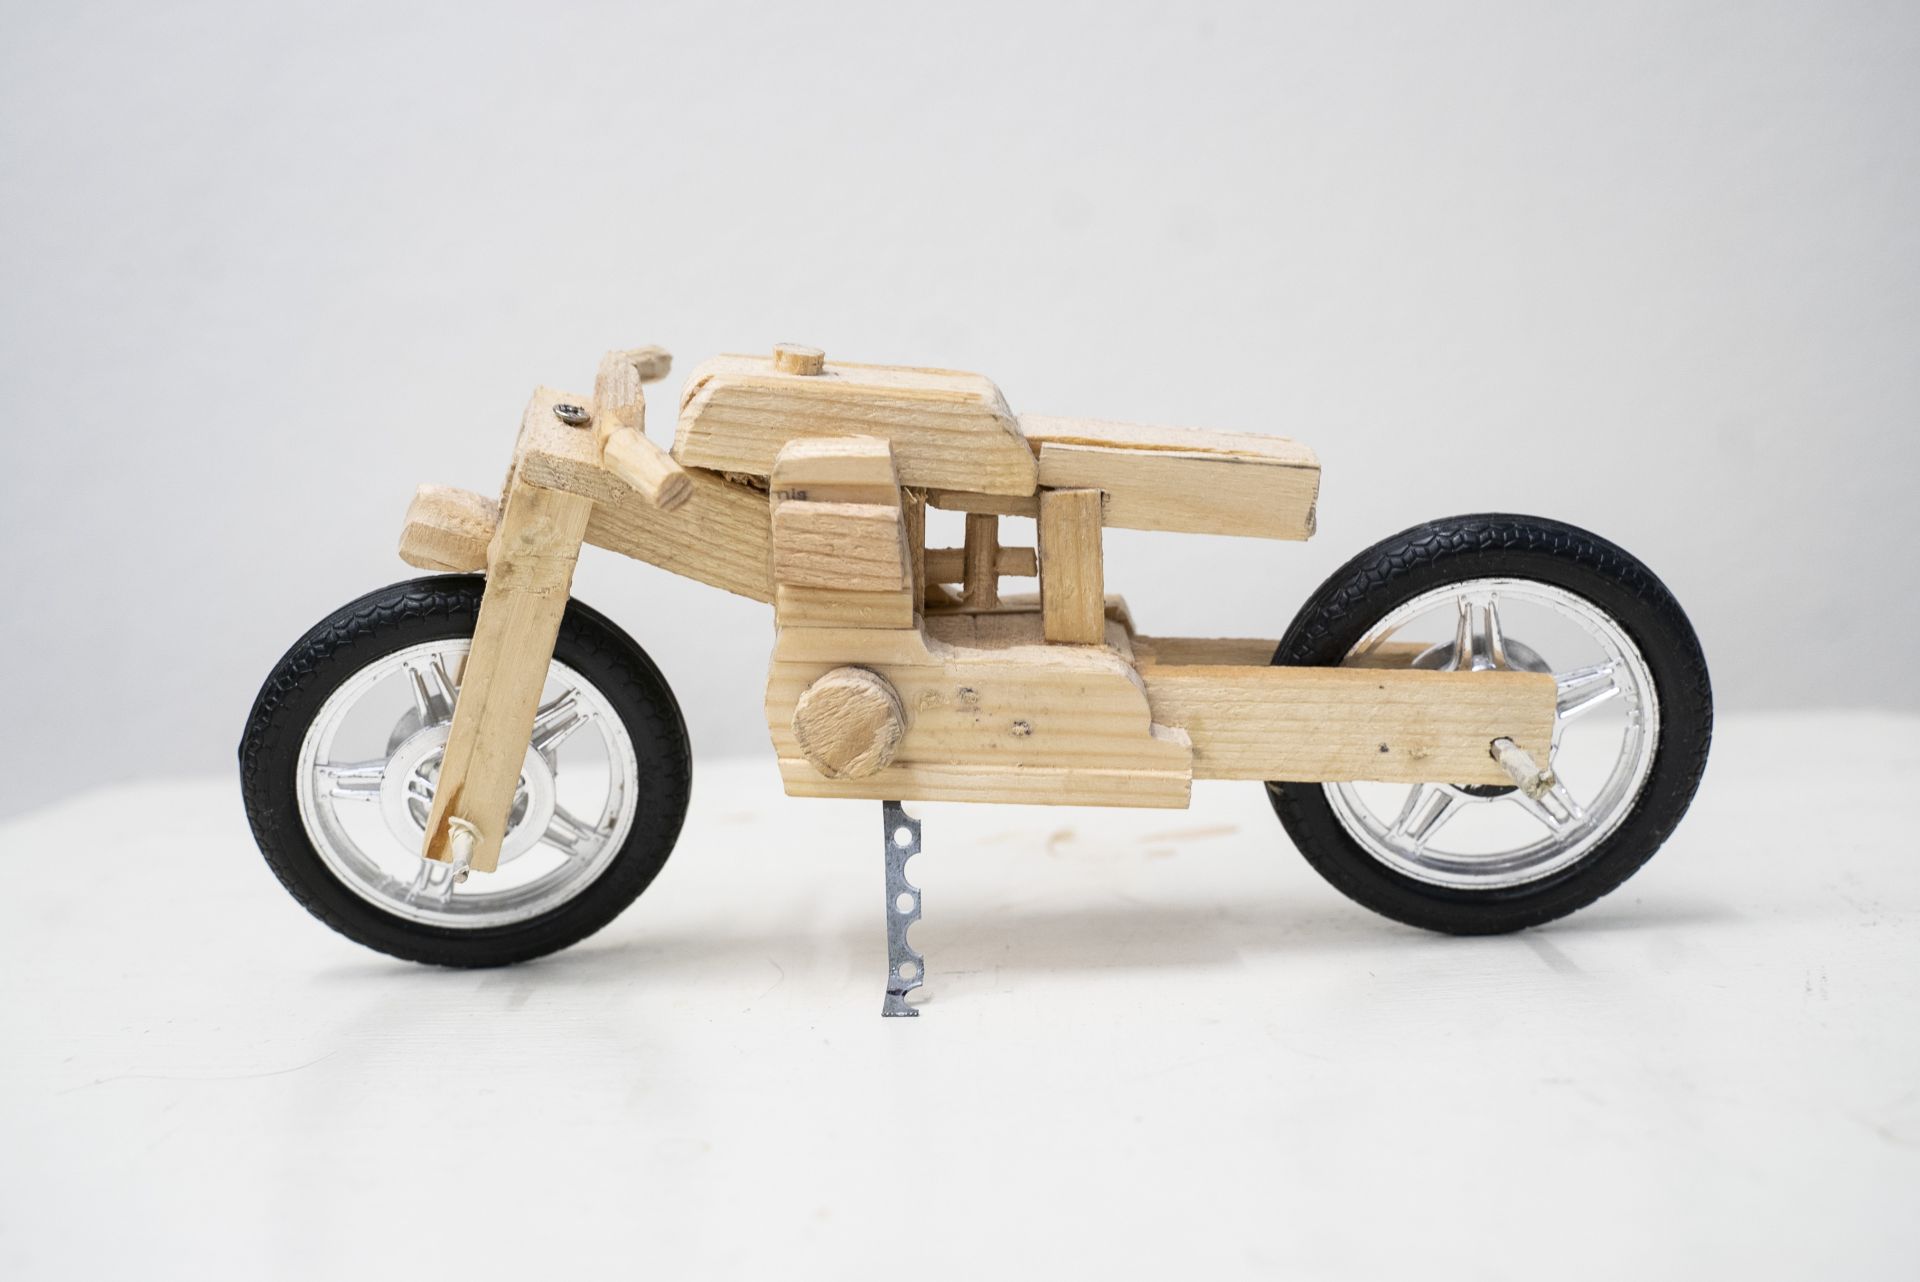 Miniature of a Harley Davidson motorcycle. The model is crafted from wood with metallic details.